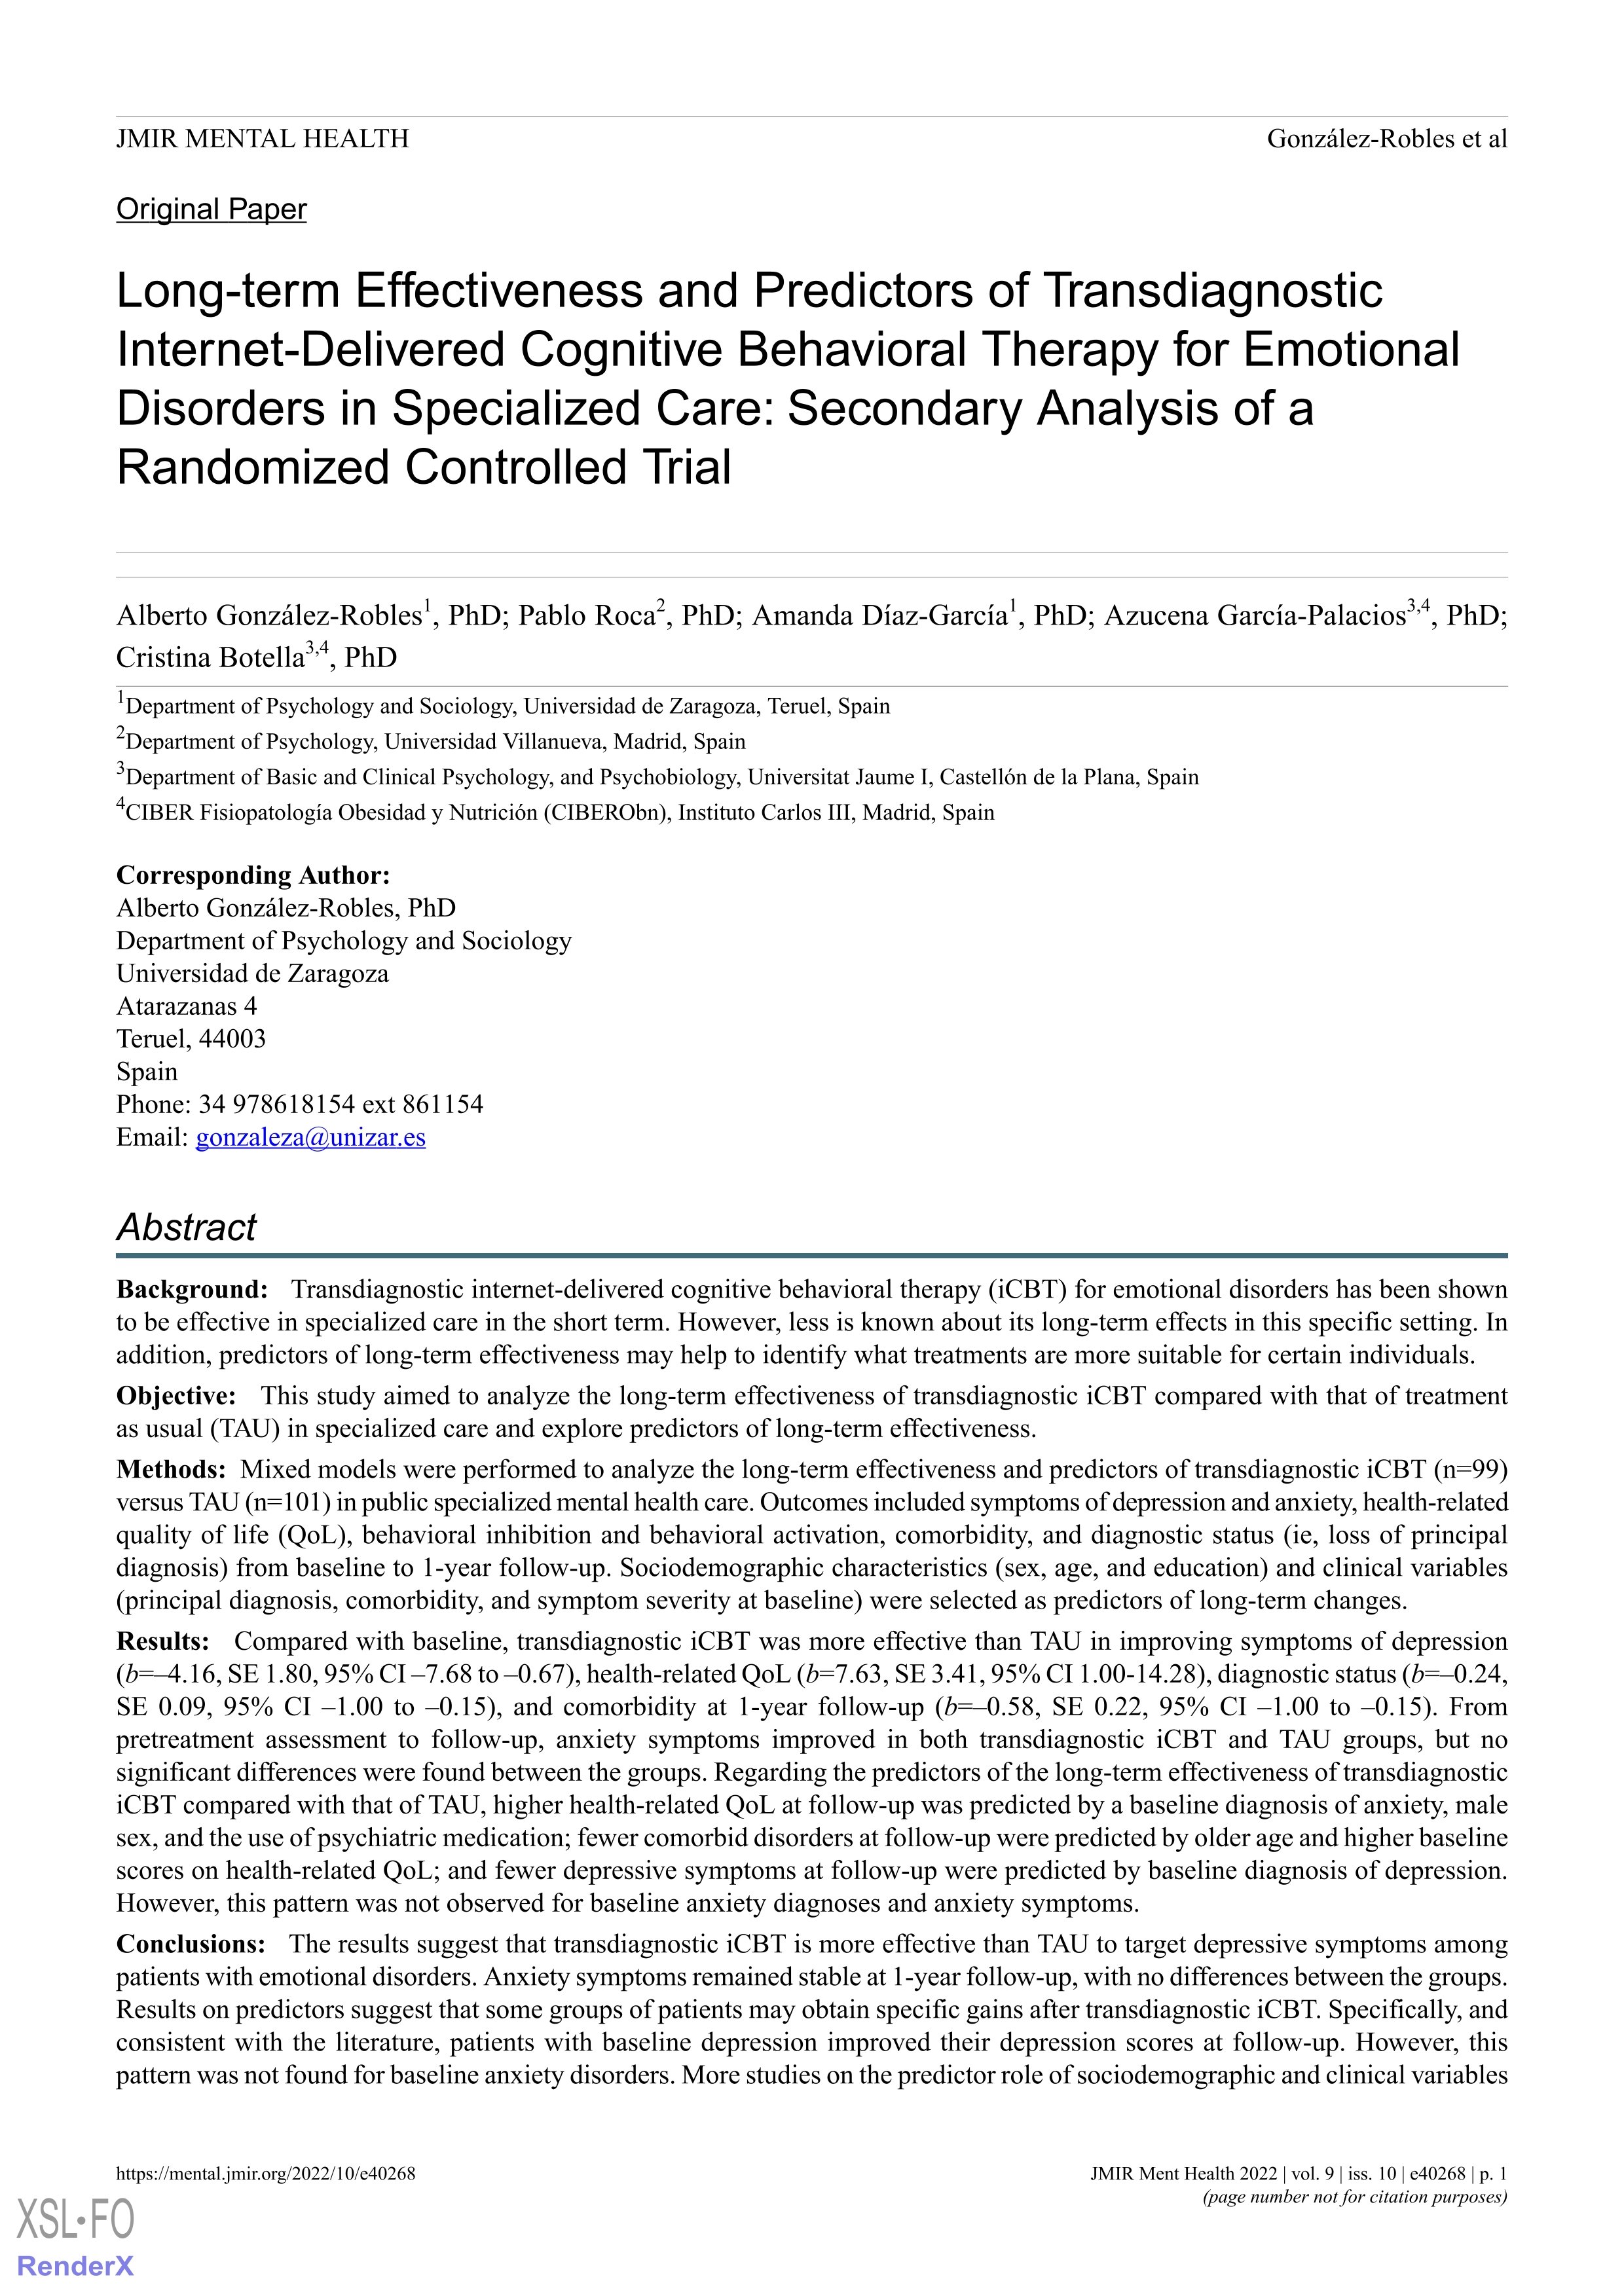 Long-term effectiveness and predictors of transdiagnostic internet-delivered cognitive behavioral therapy for emotional disorders in specialized care: secondary analysis of a randomized controlled trial